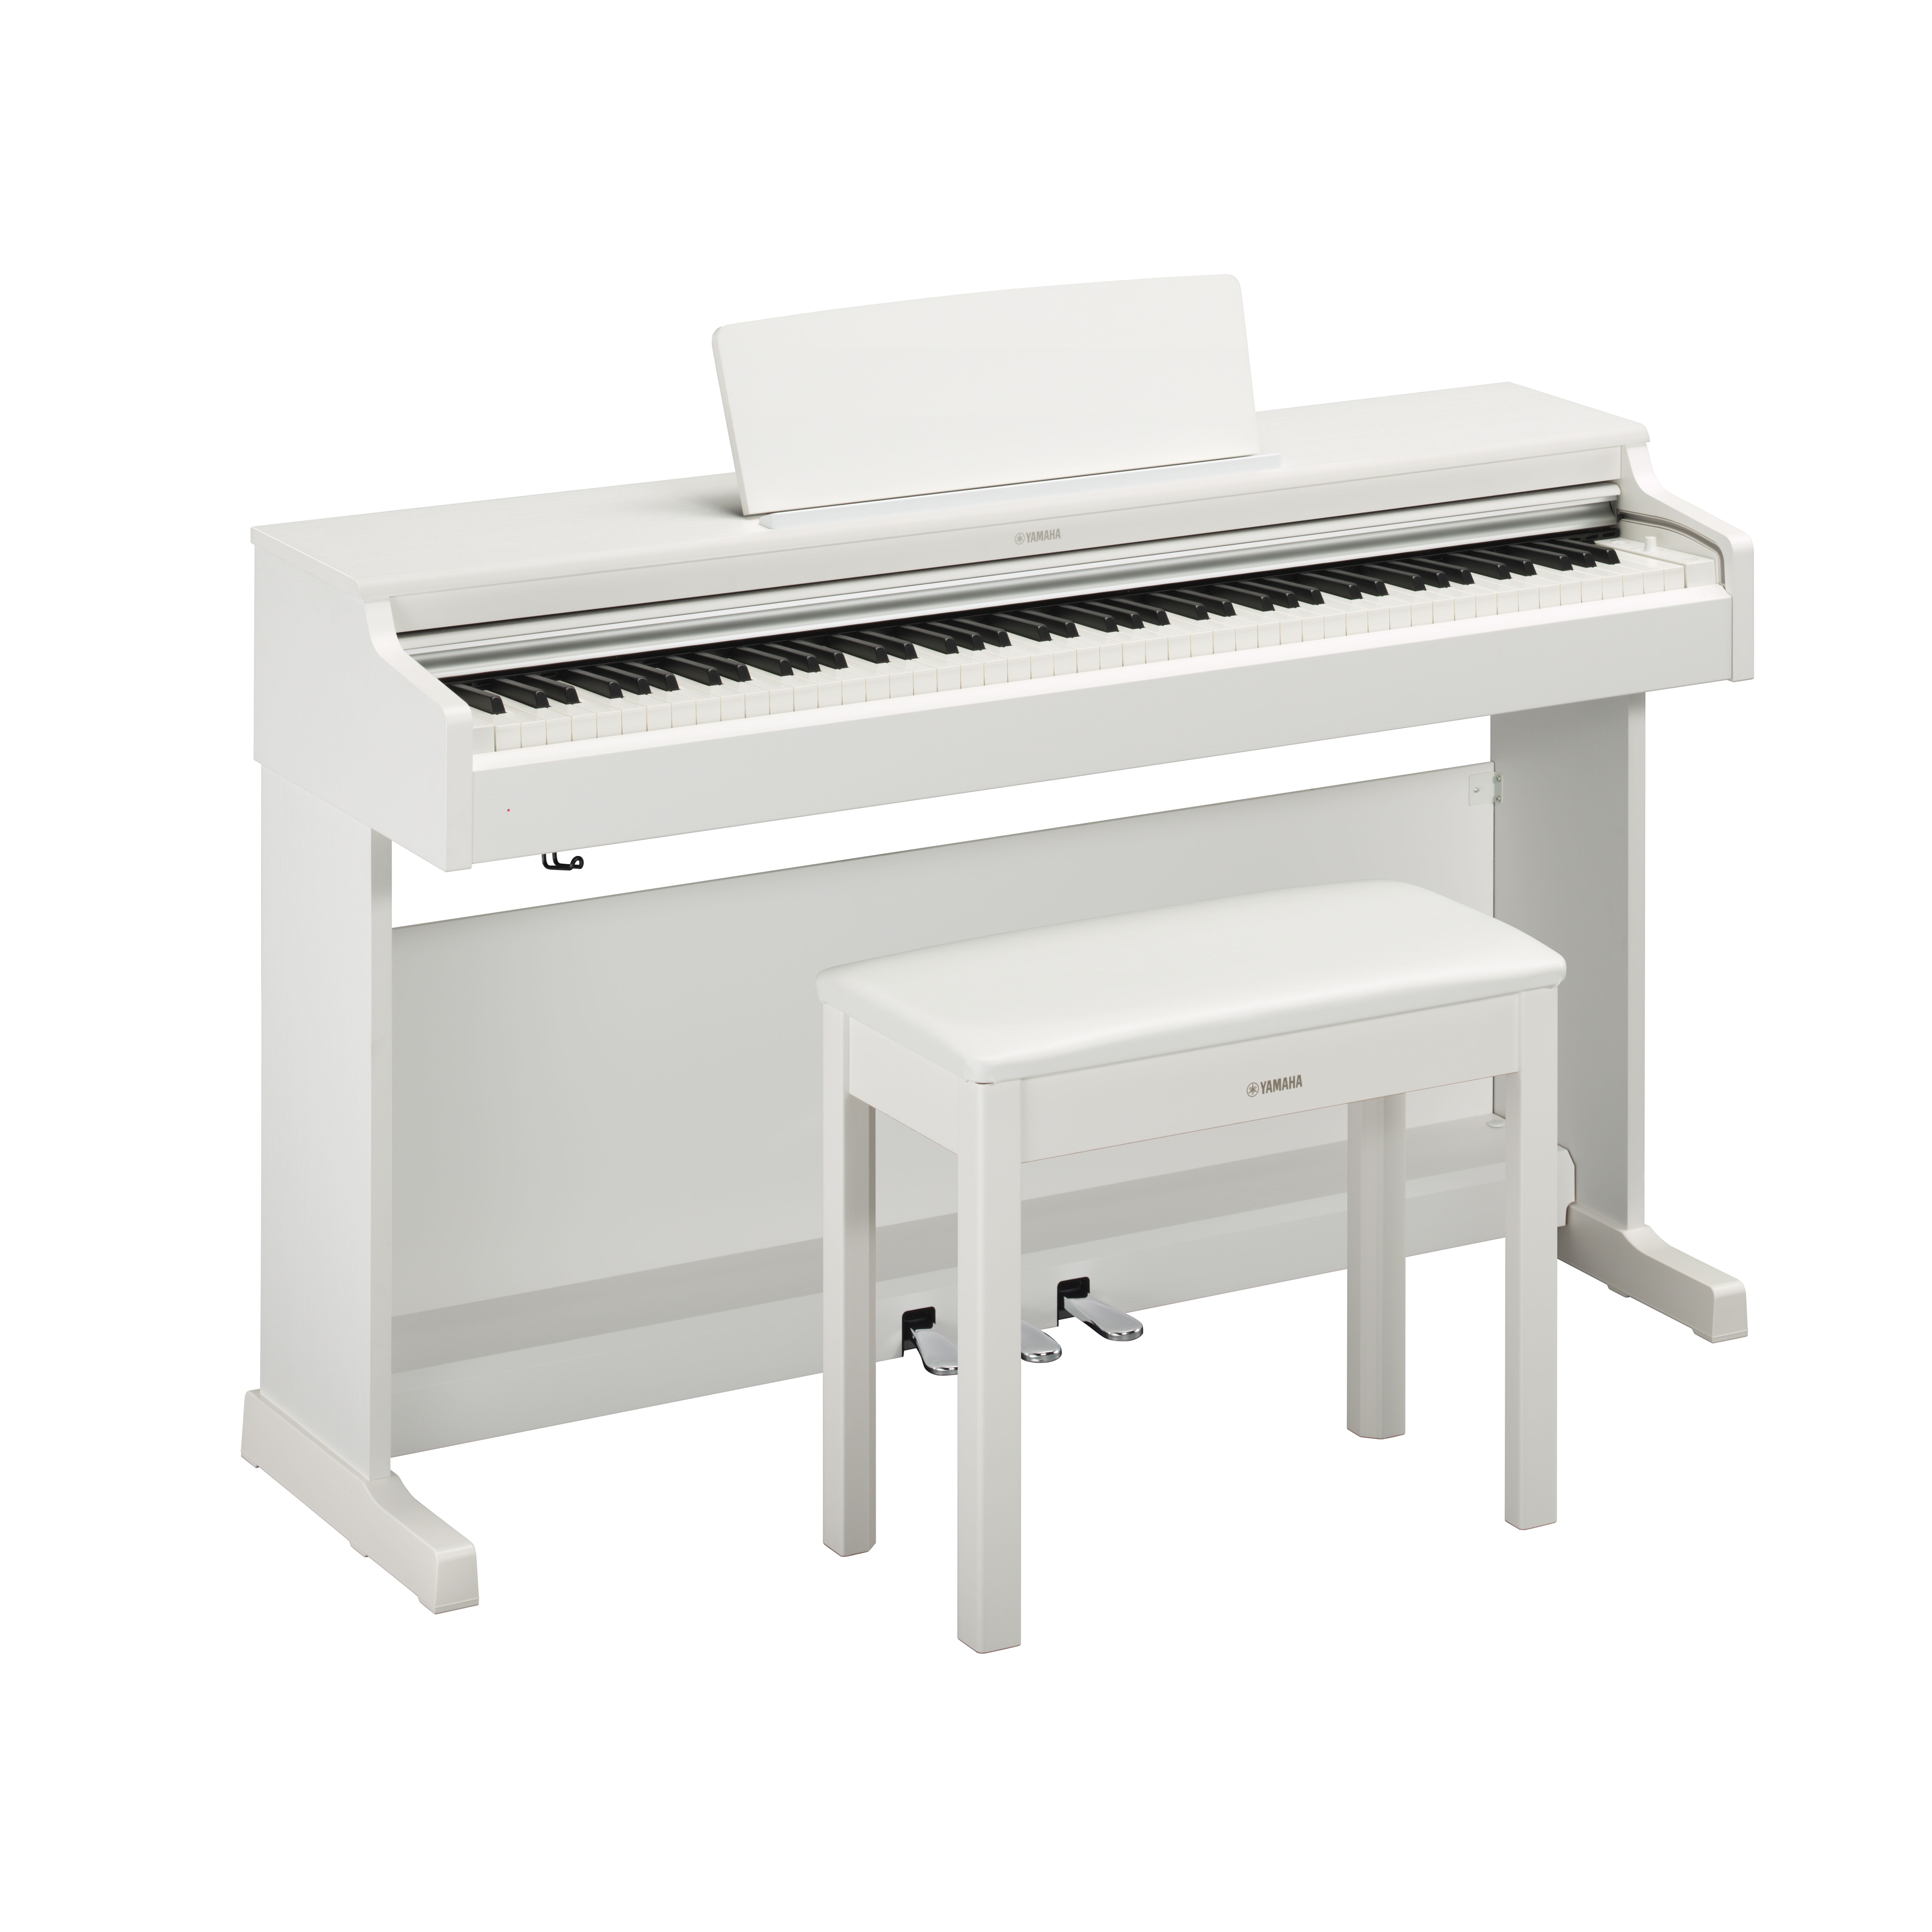 YDP-164 - Overview - ARIUS - Pianos - Musical Instruments 